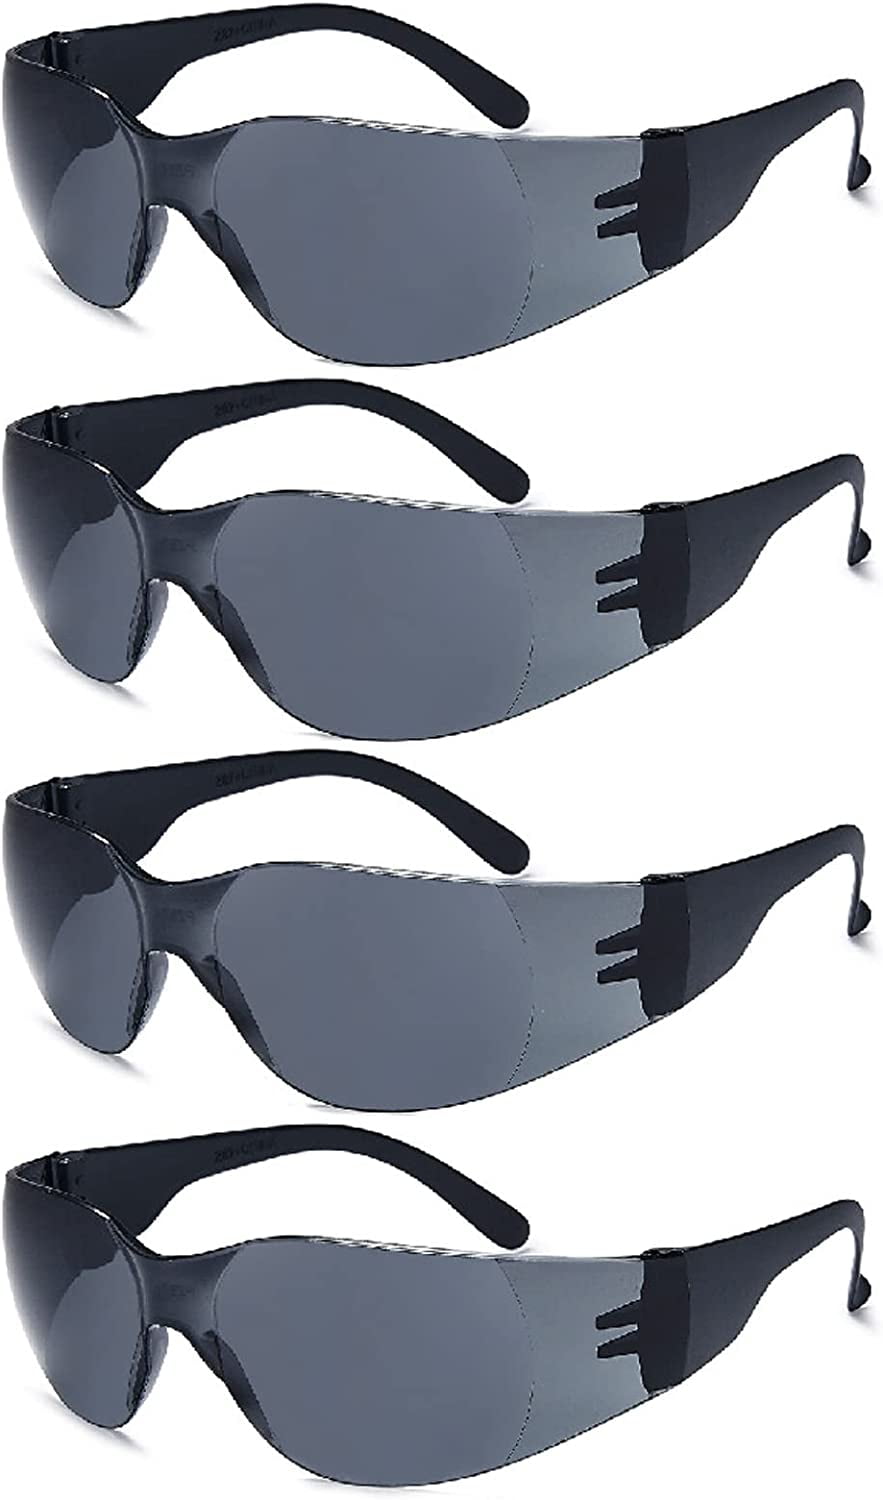 Frontier Hardy Black Eye Protection Safety Glasses Pack of 5 M Hardy-F-SI  Smoke Grey Pack of 5 M Welding, Blowtorch, Power Tool, Wood-working,  Laboratory Safety Goggle Price in India - Buy Frontier